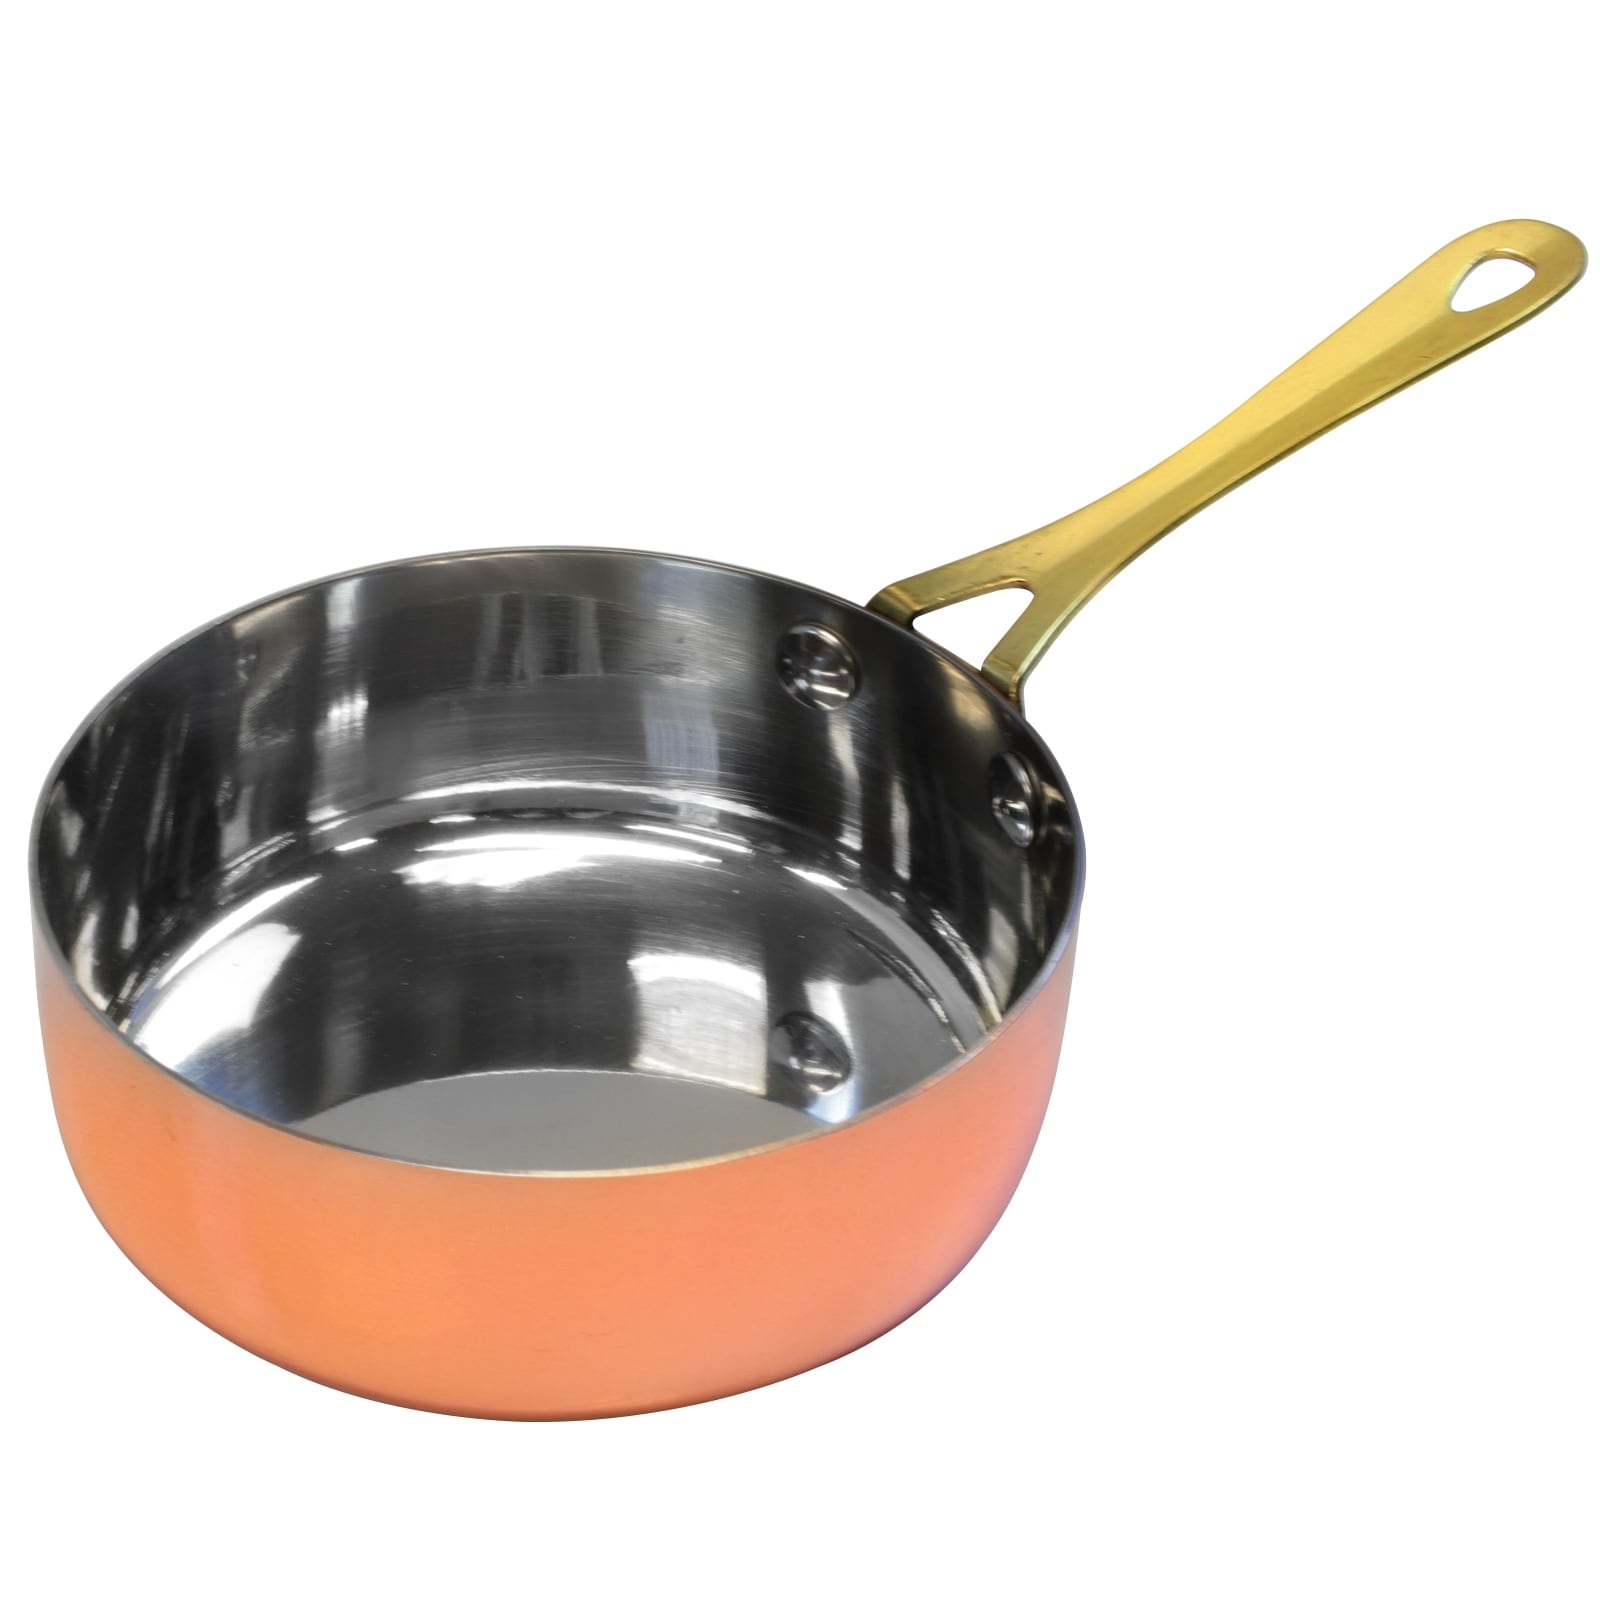 Gibson Home Rembrandt 4.7 Inch Stainless Steel Mini Frying Pan